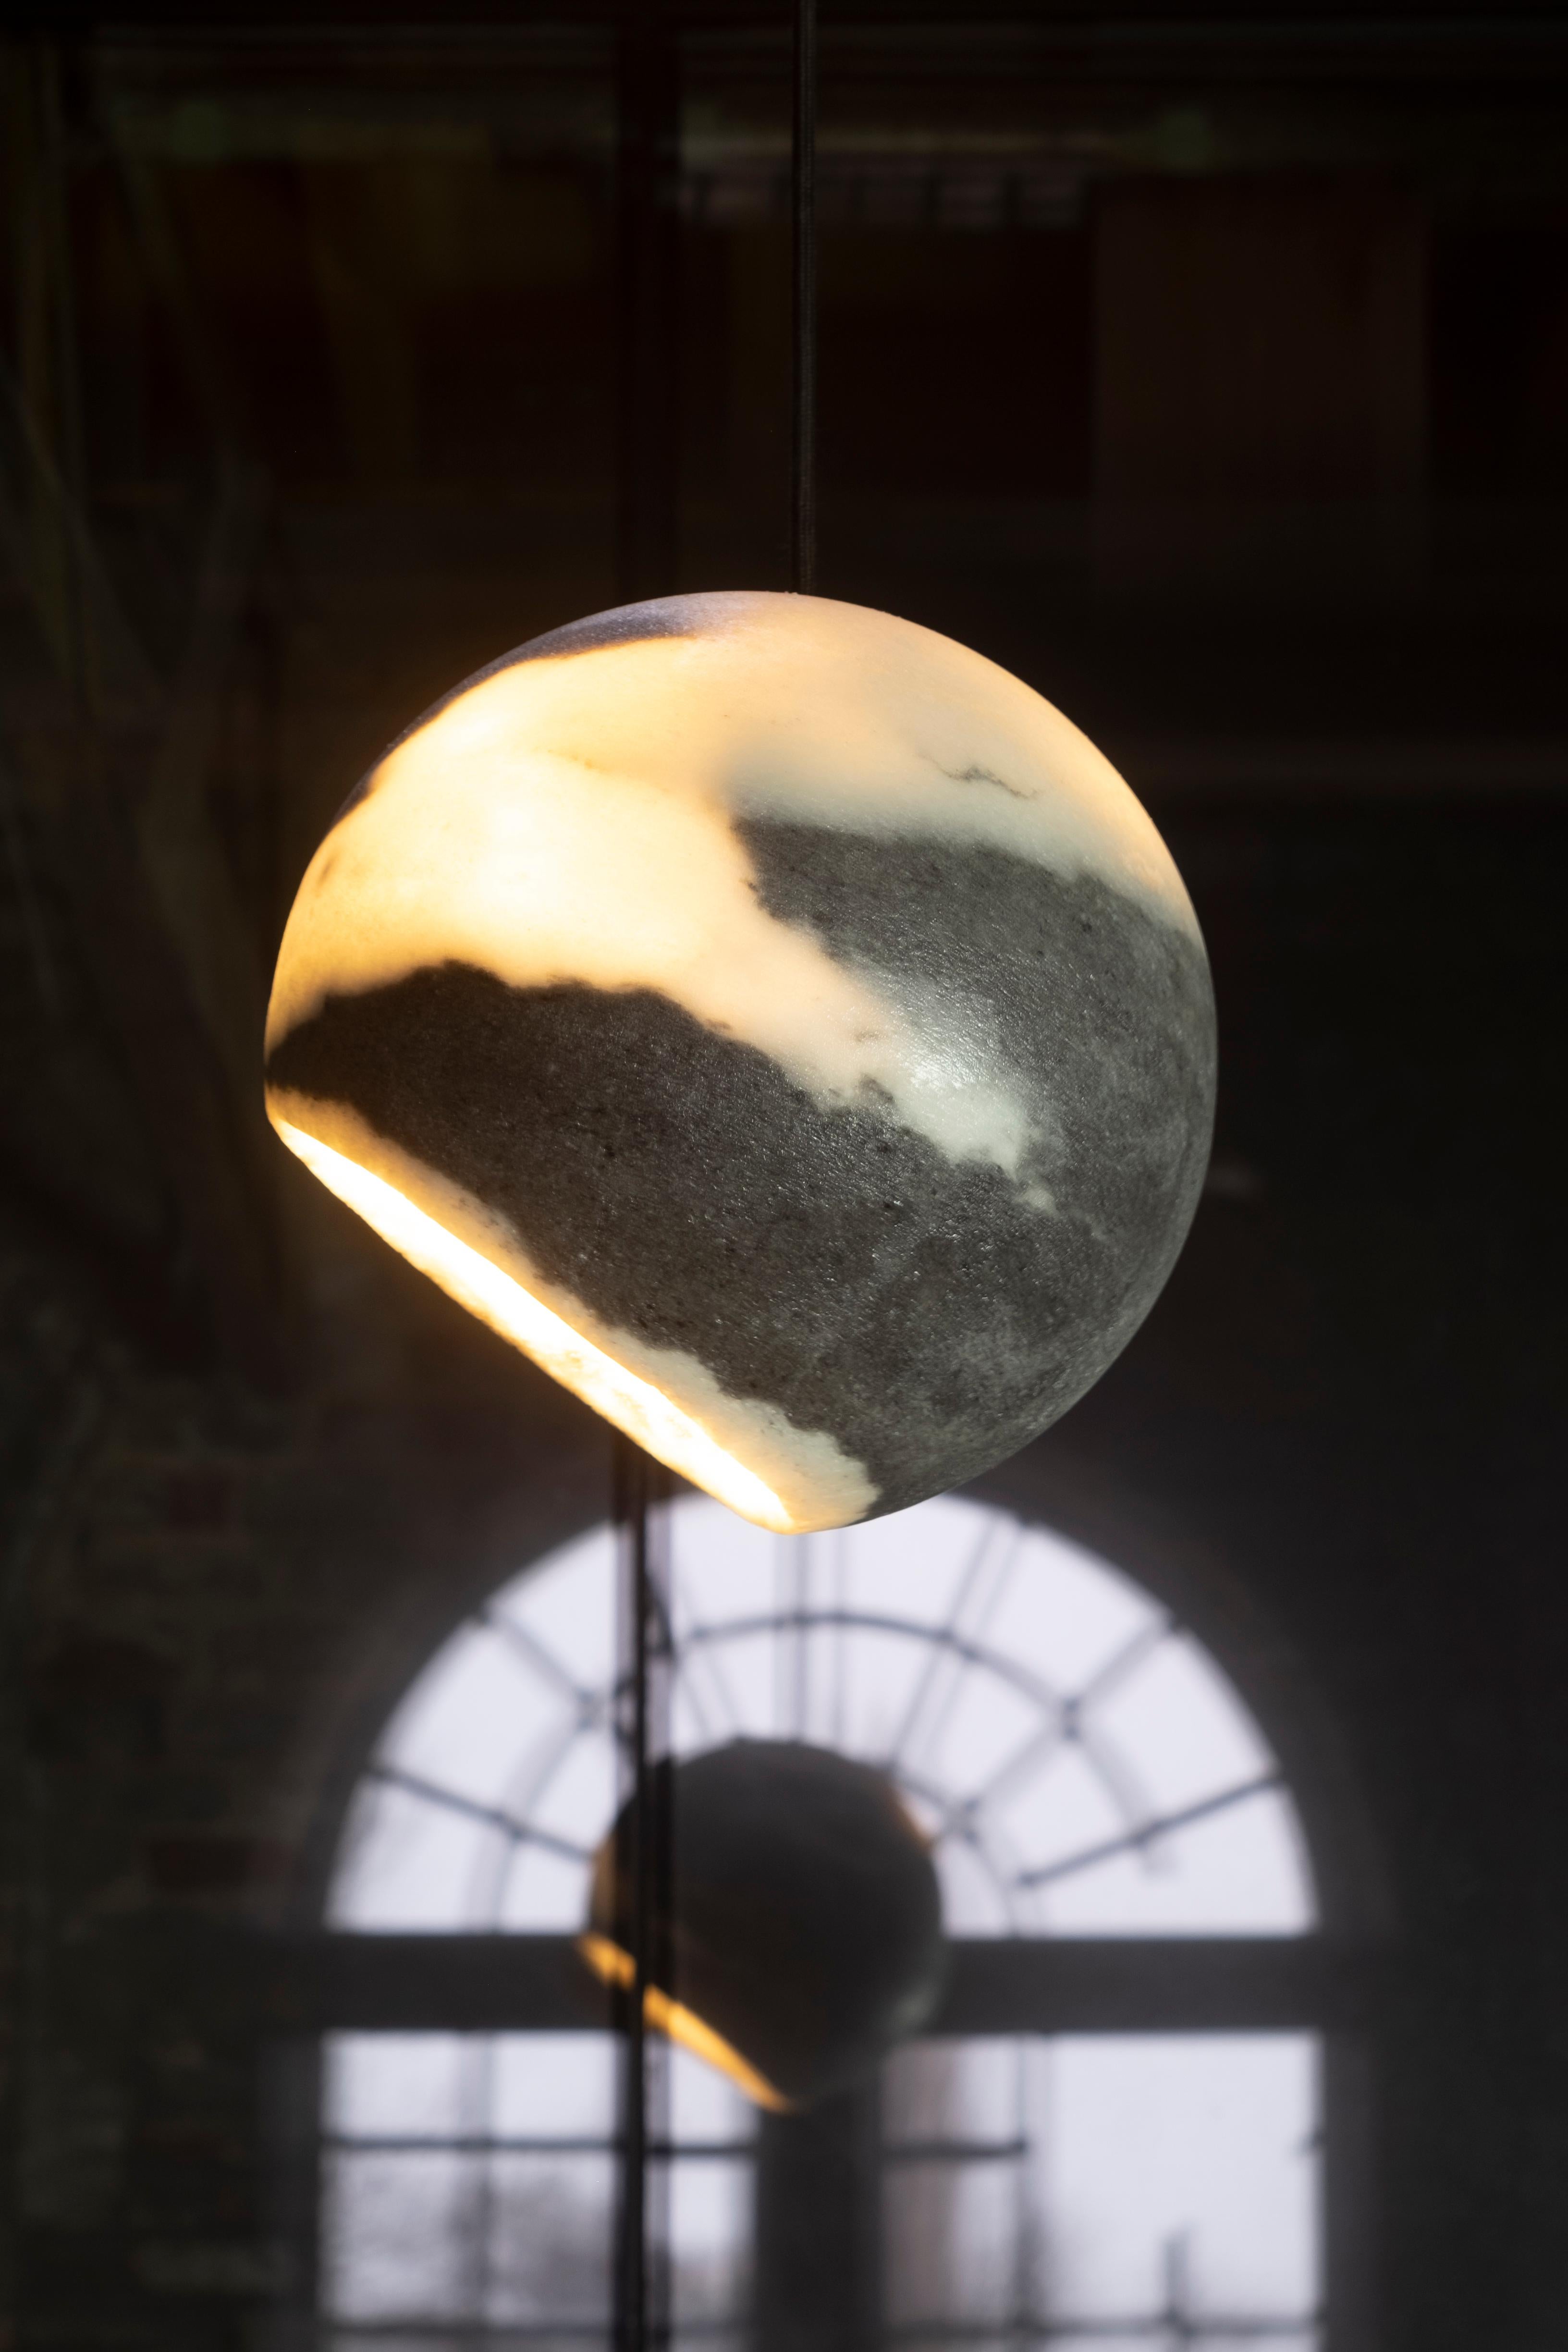 Eclipse Lamp by Roxane Lahidji
Dimensions: D 25 x H 20 cm
Material: Marbled salts
A unique award winning technique developed by Roxane Lahidji

Award winner of Bolia Design Awards 2019 and FD100 and present in the collections of the Design Museum